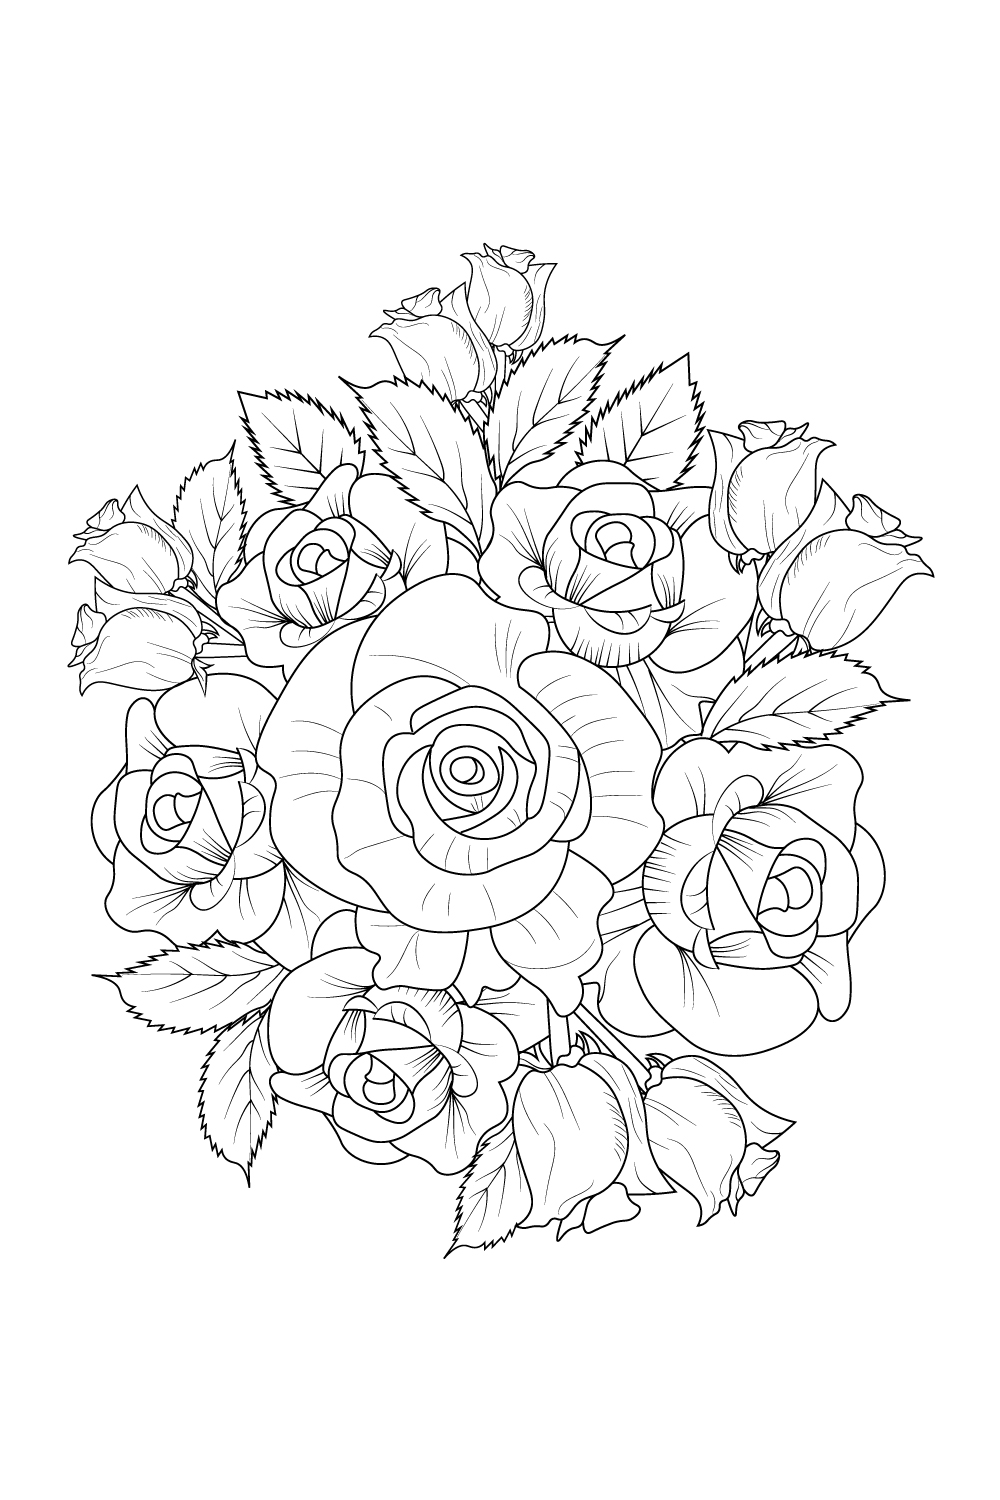 rose flower bouquet drawing outline, rose drawing, rose drawing the outline, stencil rose drawing the outline, outline stencil rose tattoo drawing, realistic rose outline stencil rose tattoo, rose flower bouquet illustration, rose botanical illustration pinterest preview image.